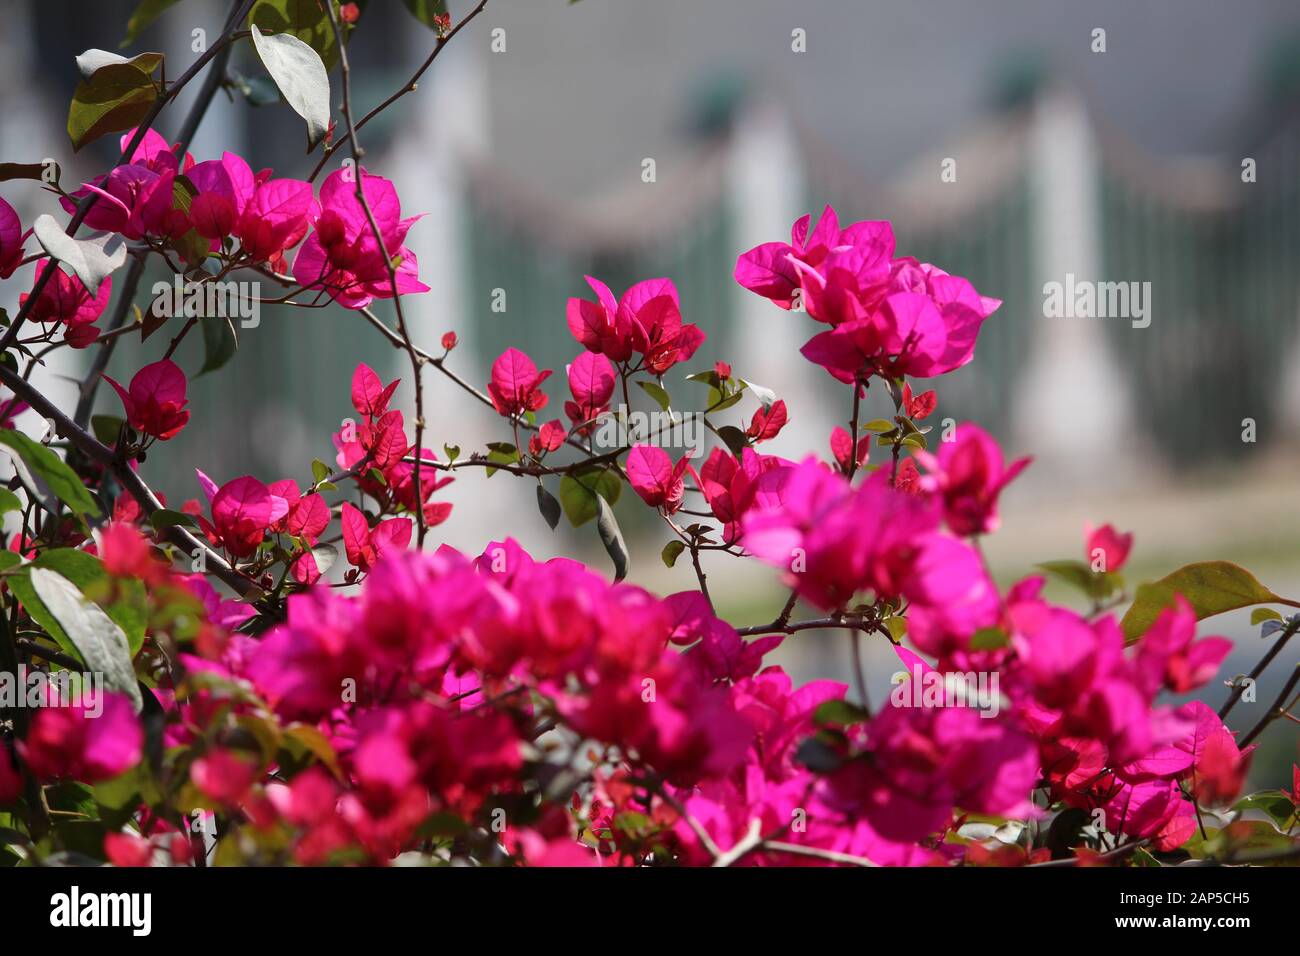 Bougainvillea commonly known as Kagoji flower or Paper flower  & is native to India to South America from Brazil west to Peru and south to Argentina. Stock Photo